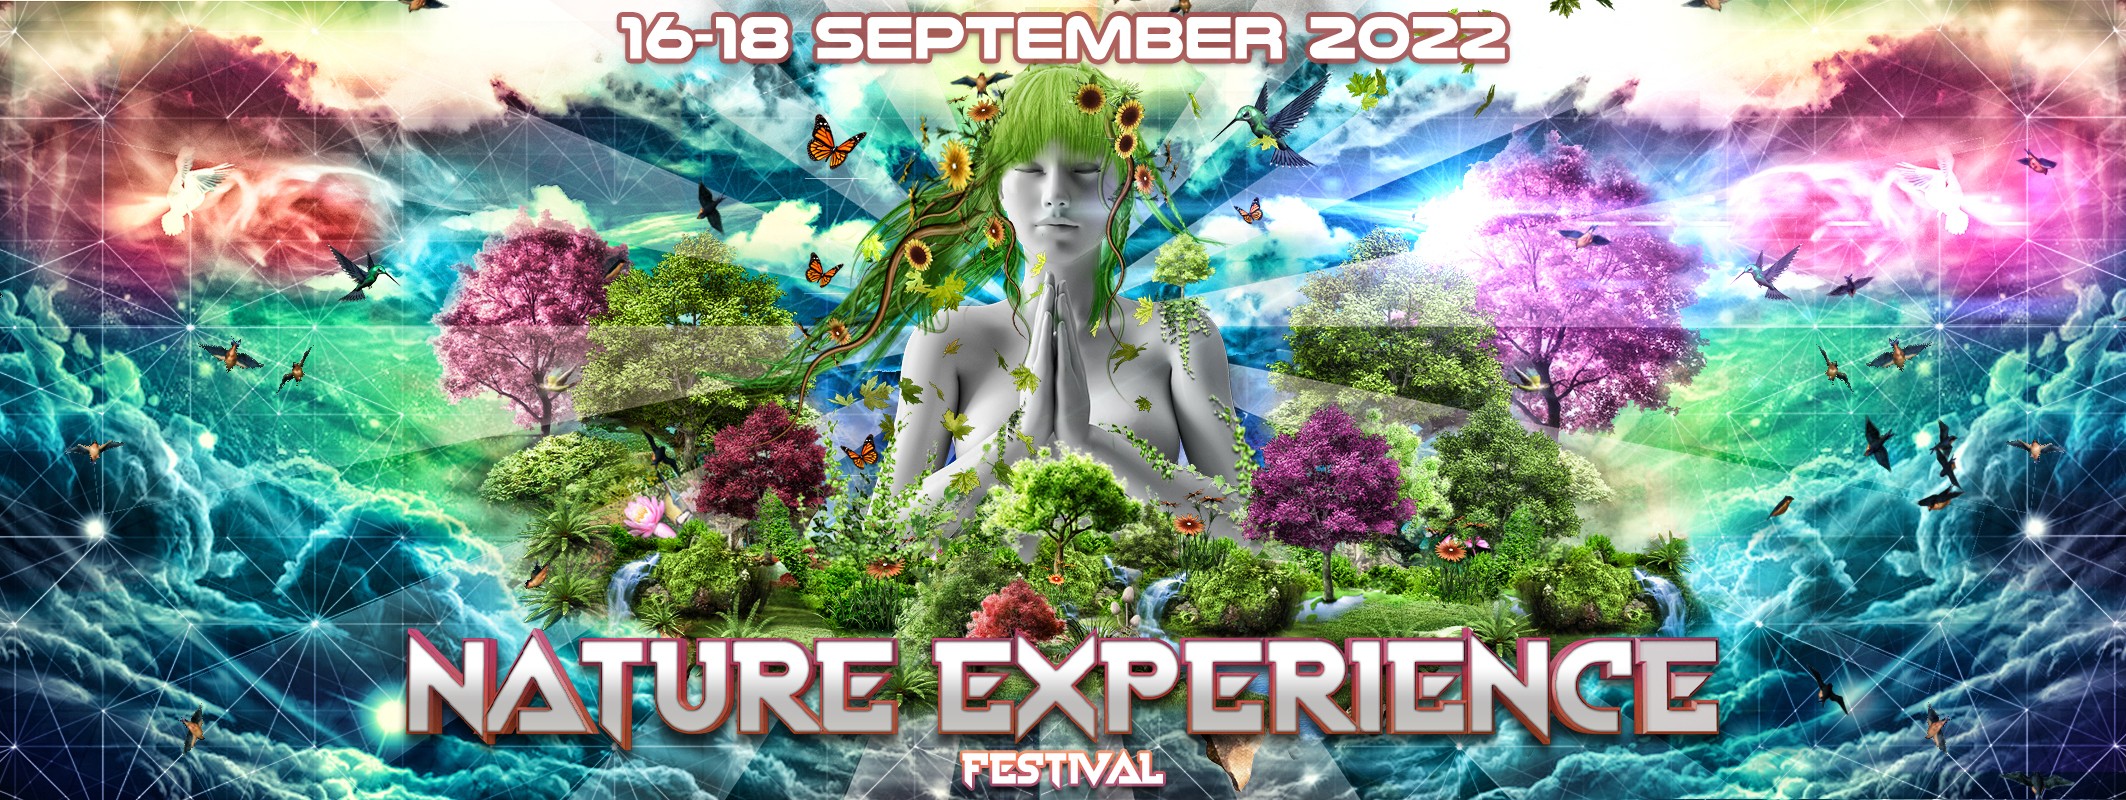 nature-Experience-festival-2022